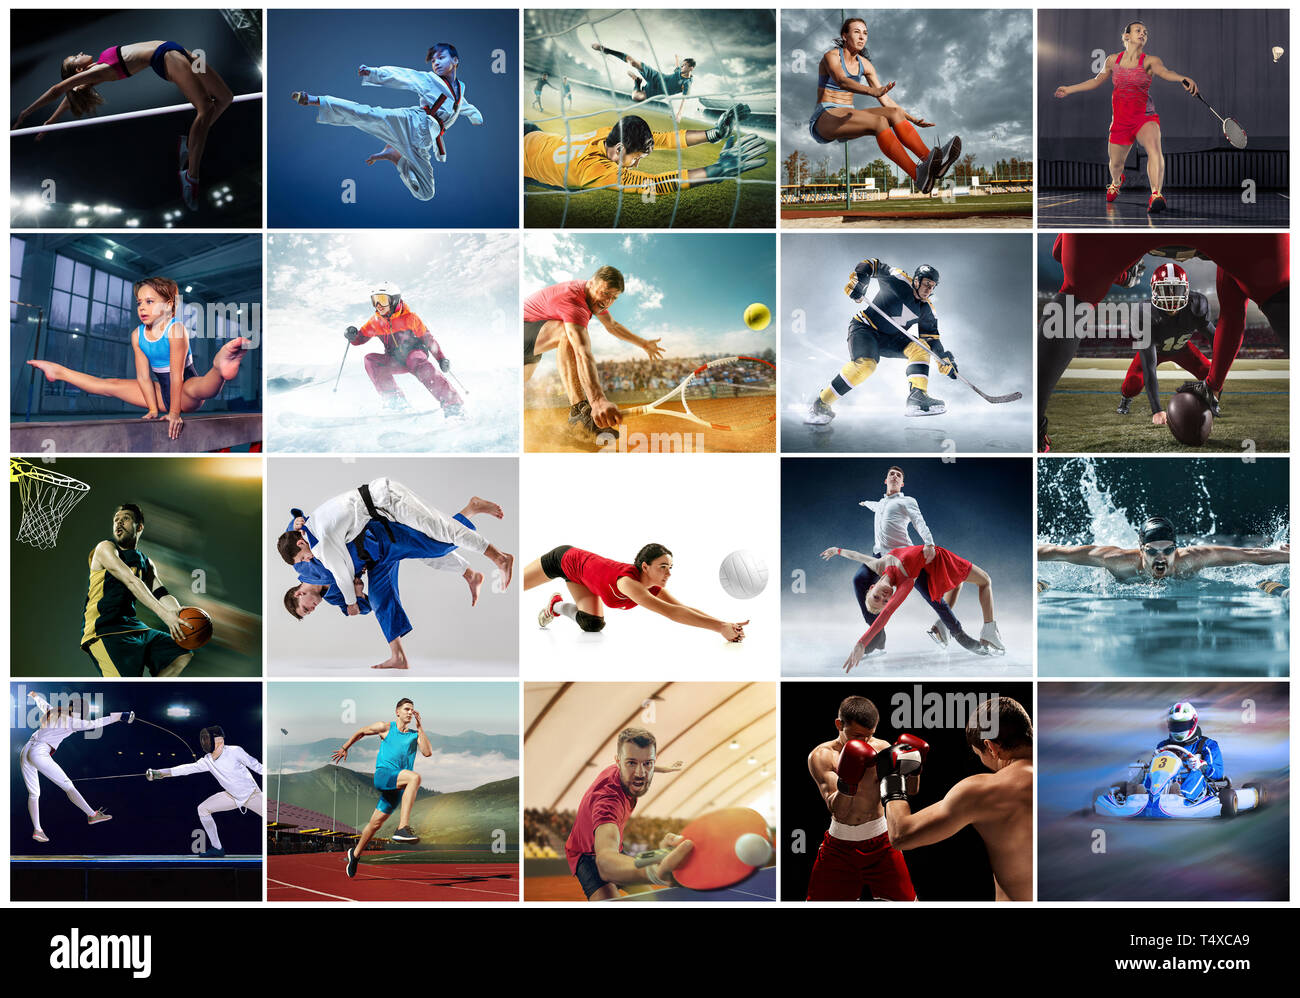 Sport Collage About Table Tennis Badminton Gymnastics Boxing Volleyball Soccer And American